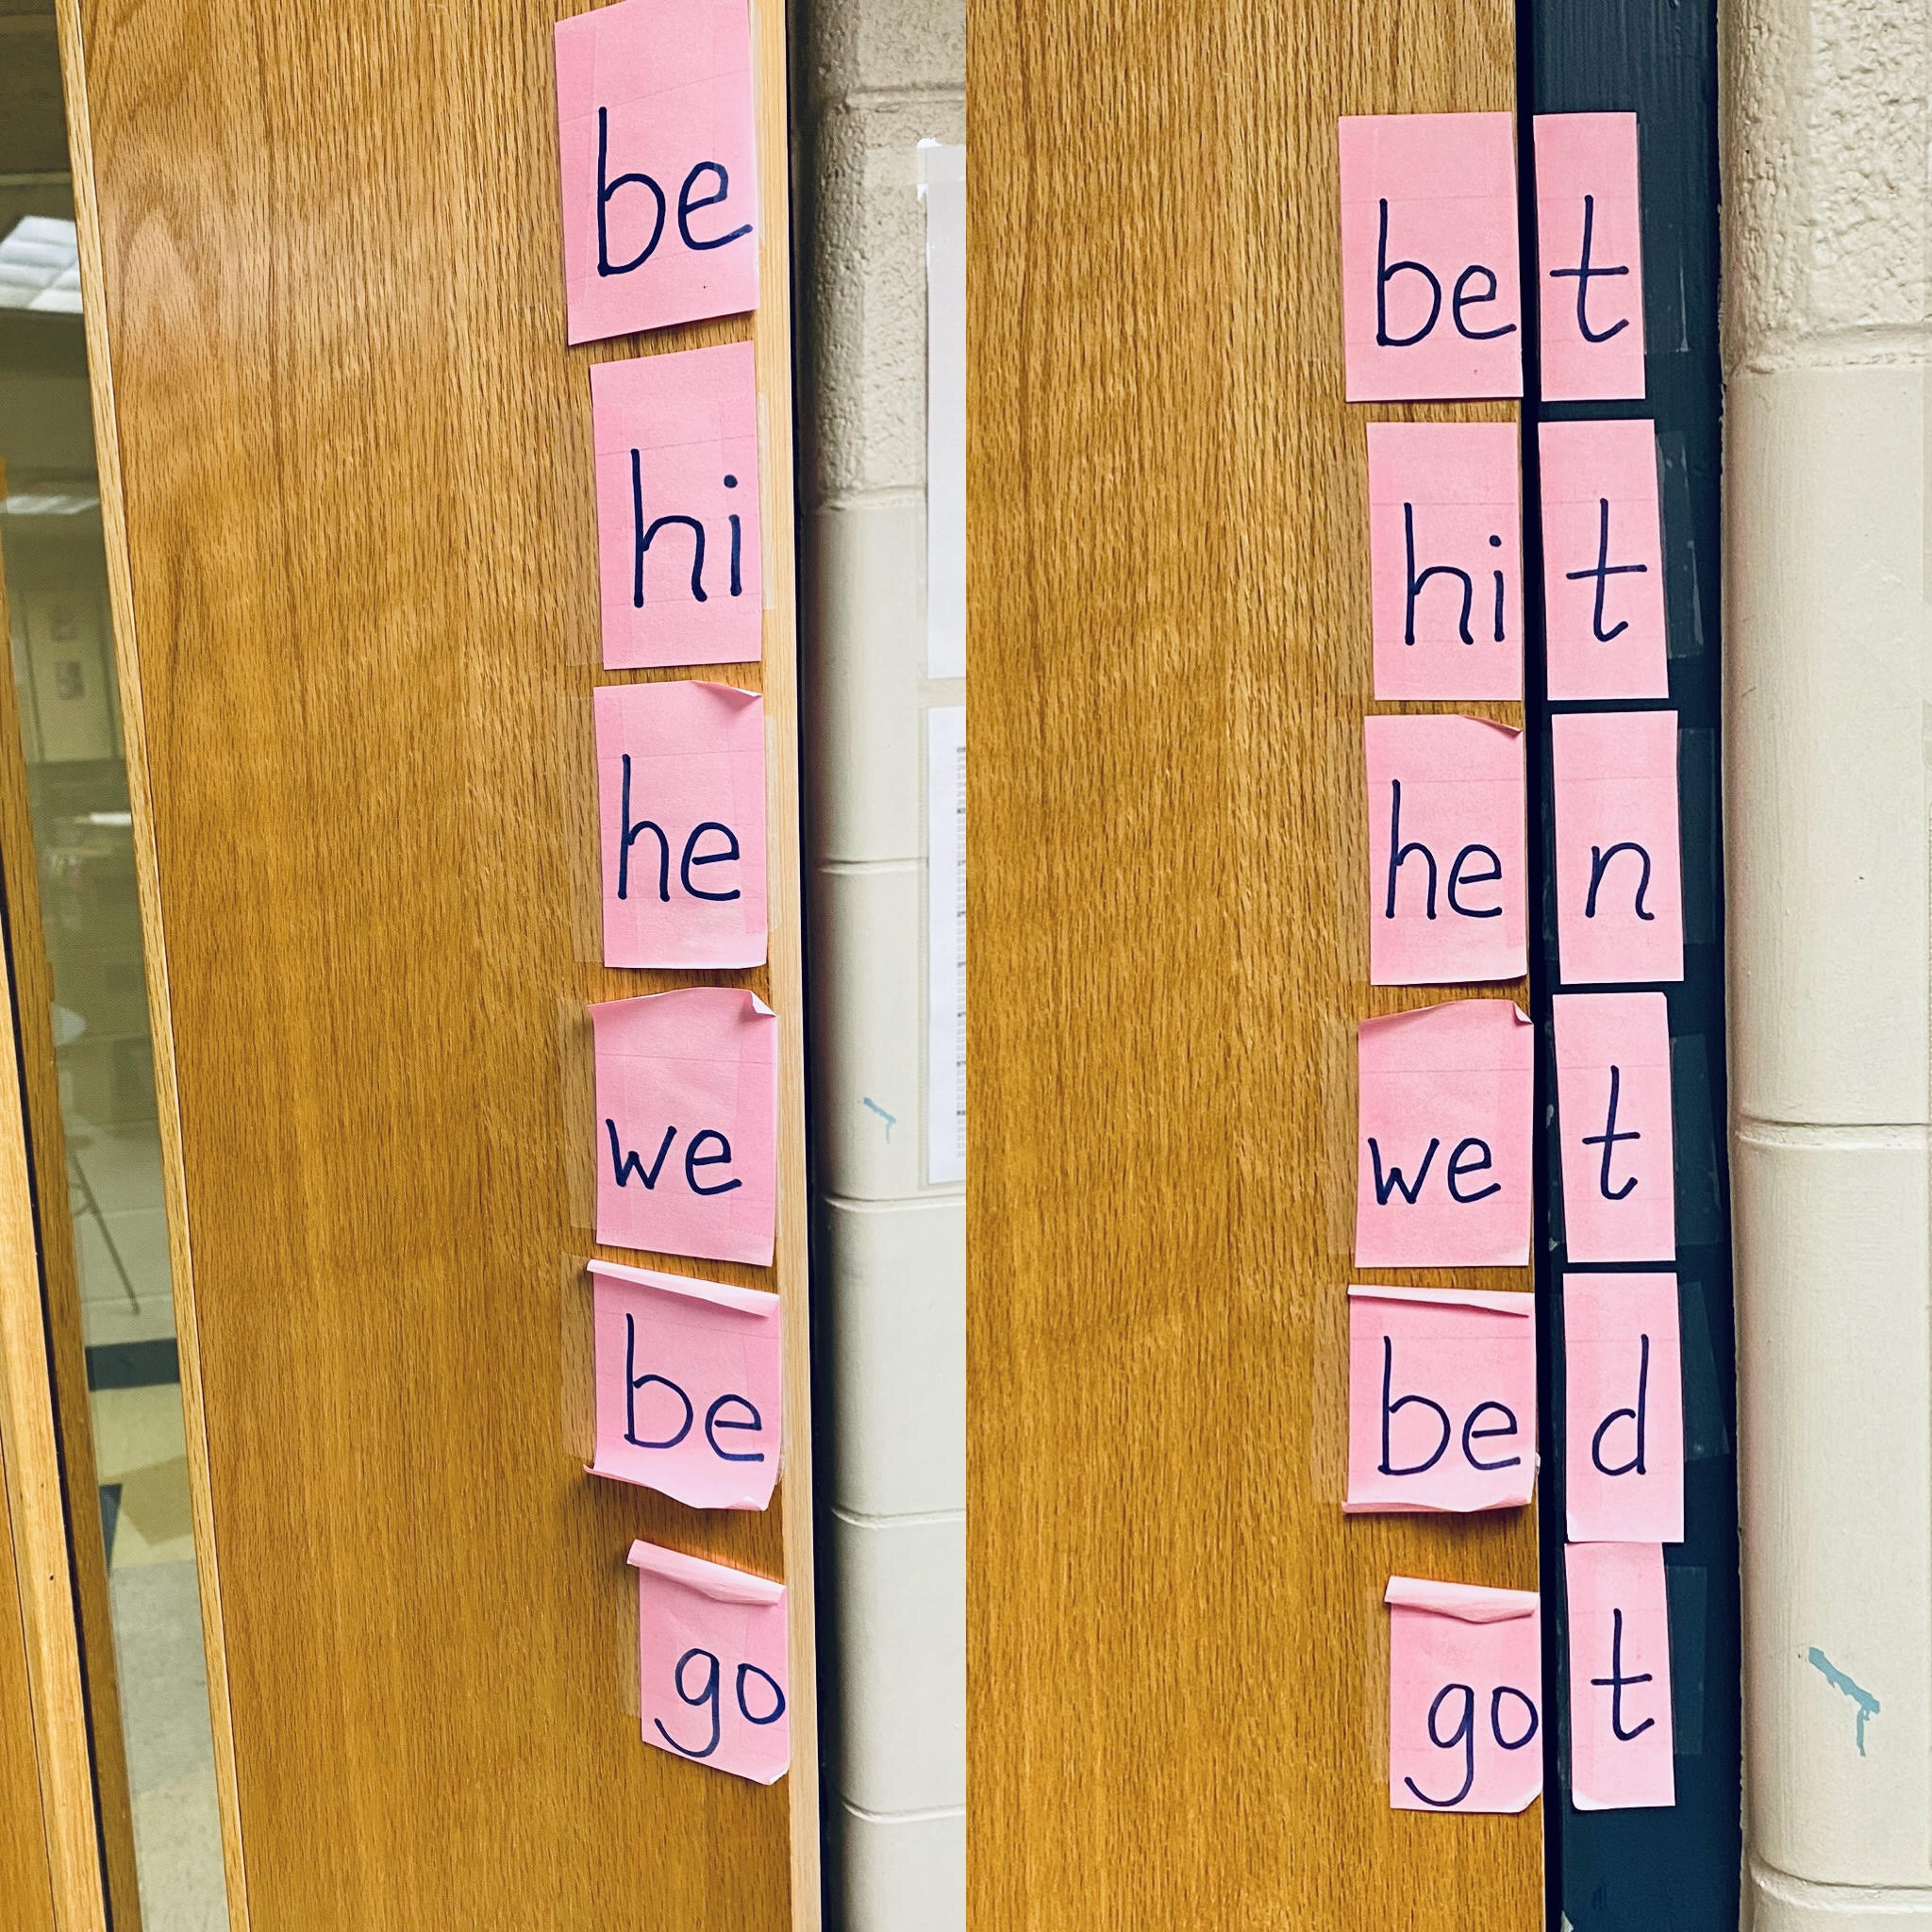 A colleague of mine used the door to demonstrate open and closed syllables.